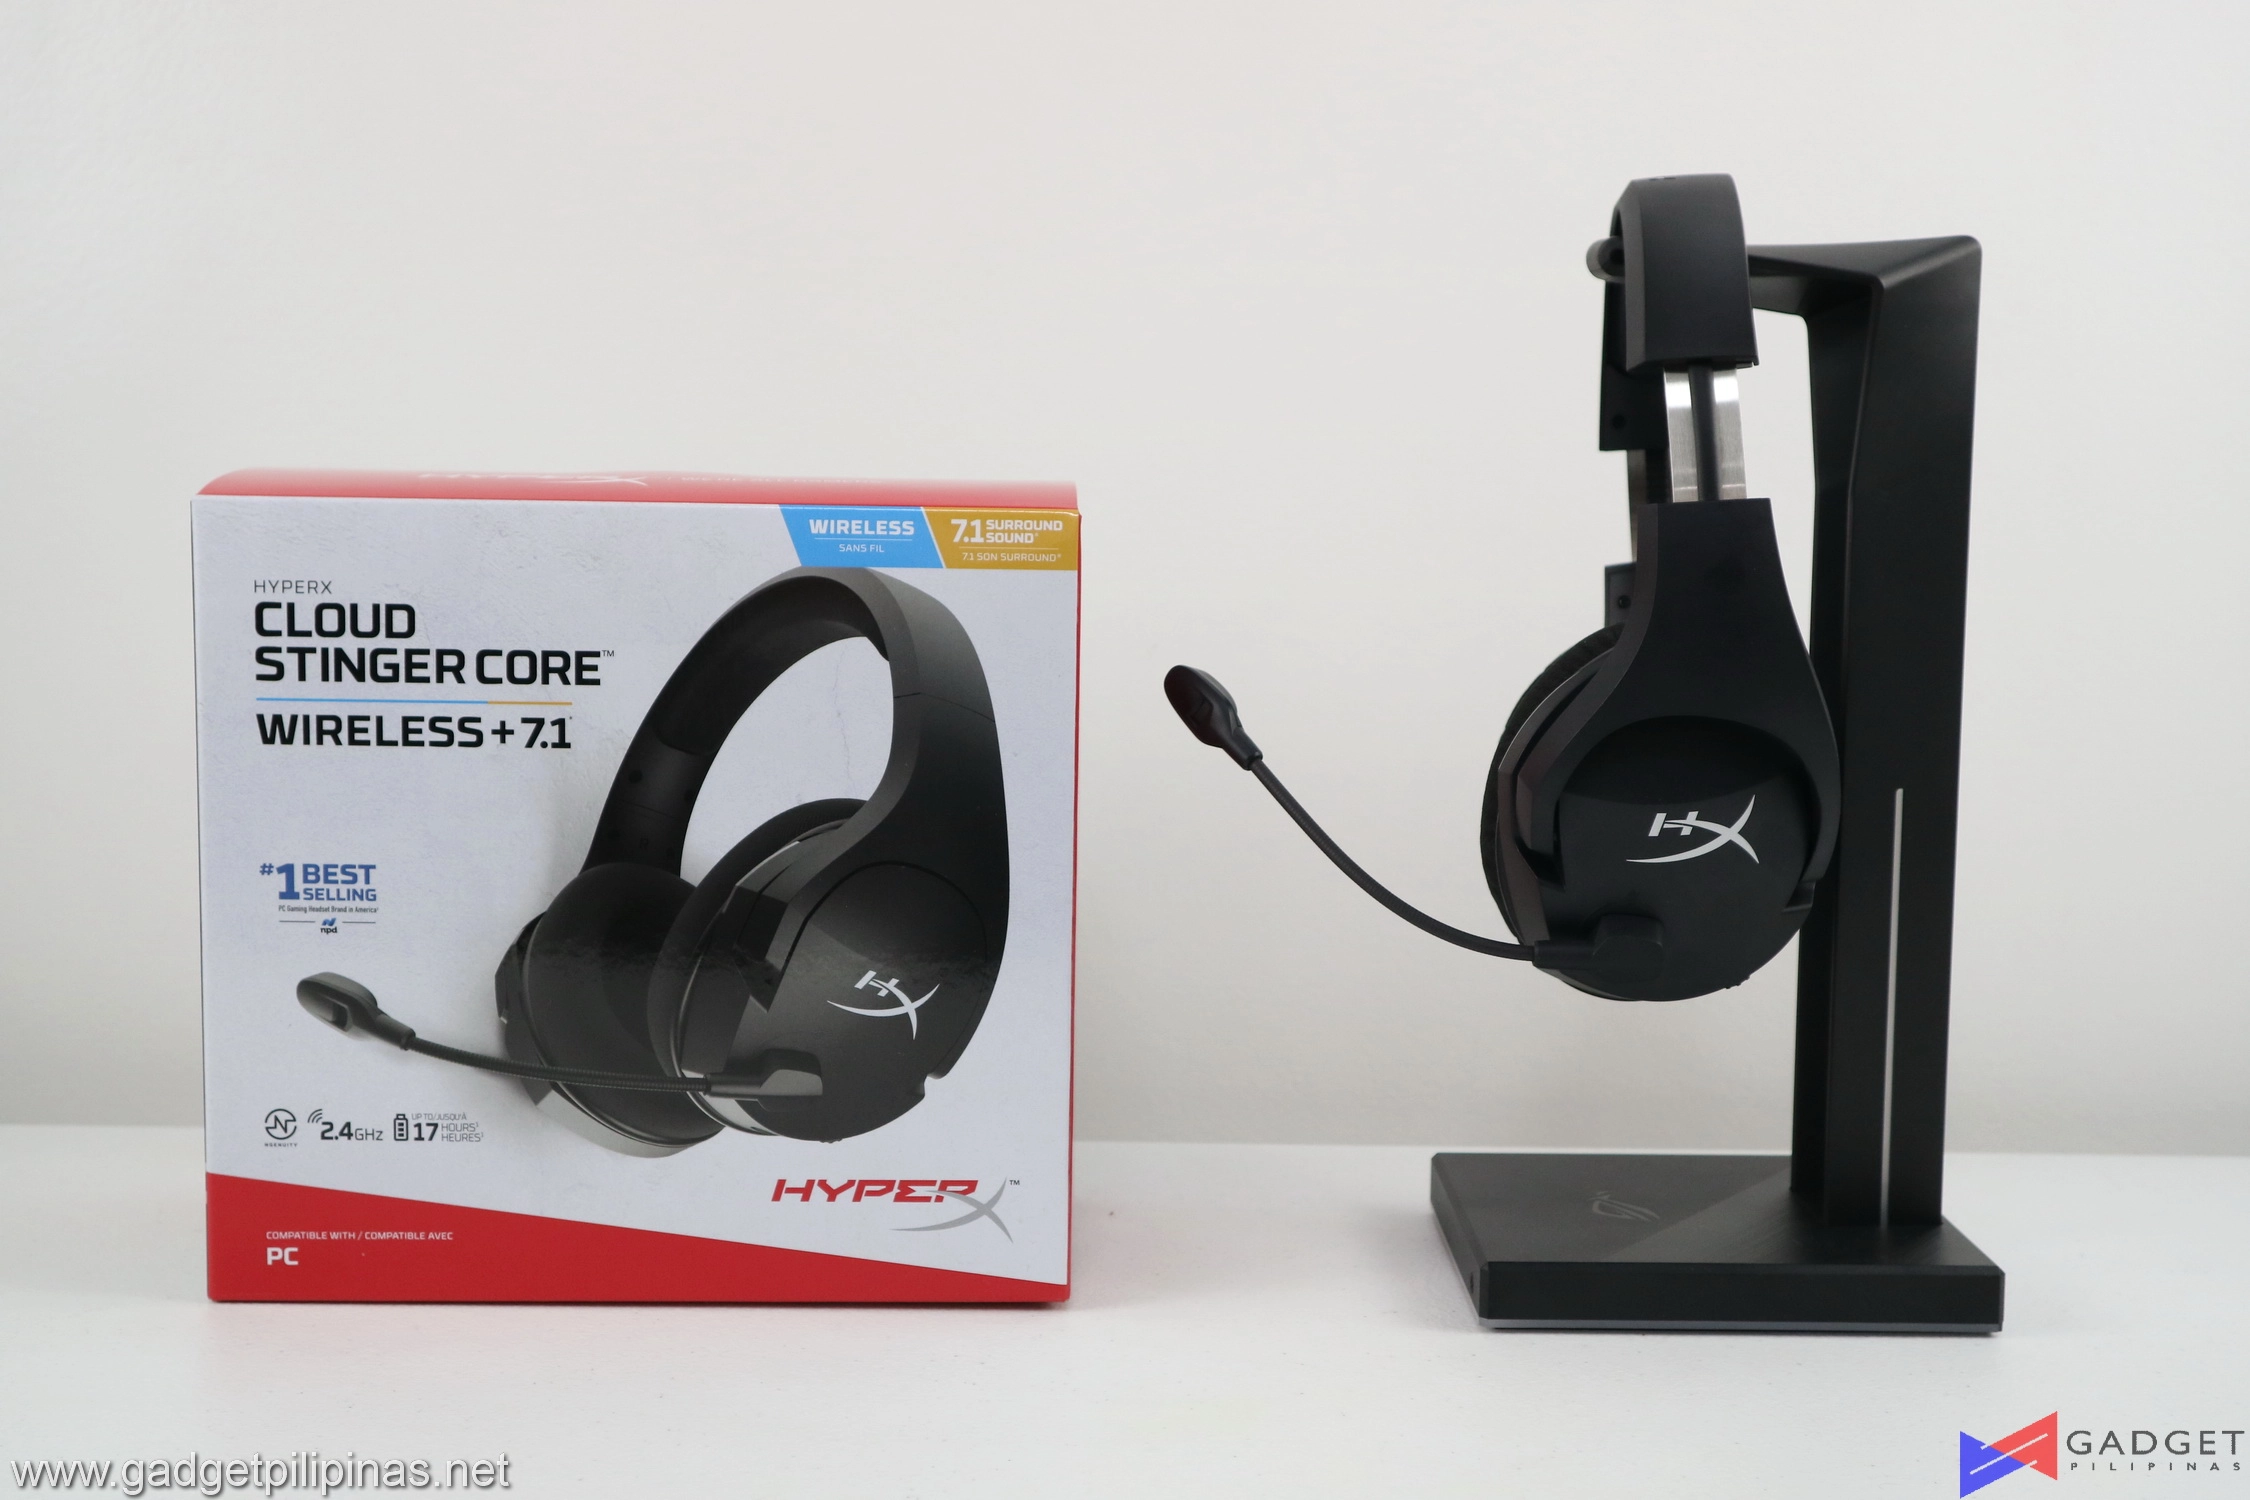 HyperX Cloud Stinger Core Wireless 7.1 Gaming Headset Review